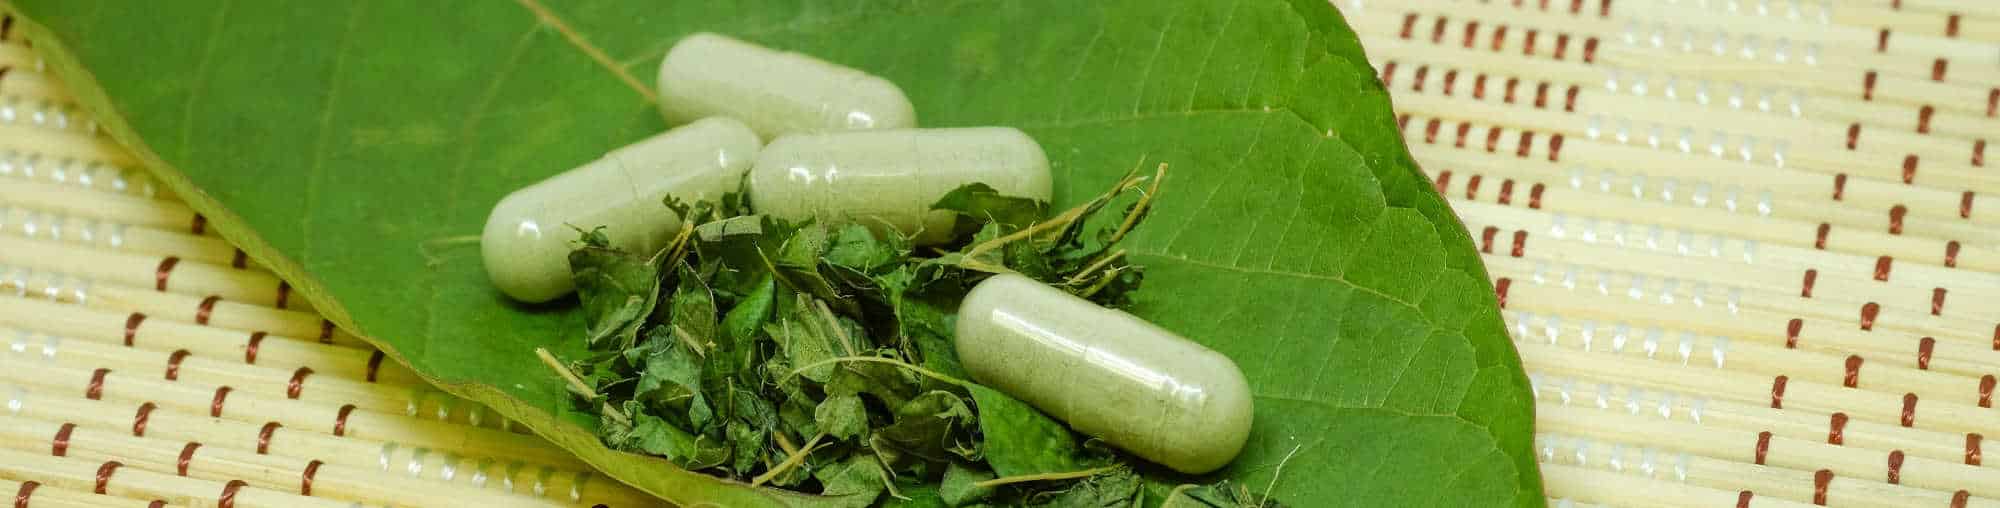 image ofkratom leaves and capsules